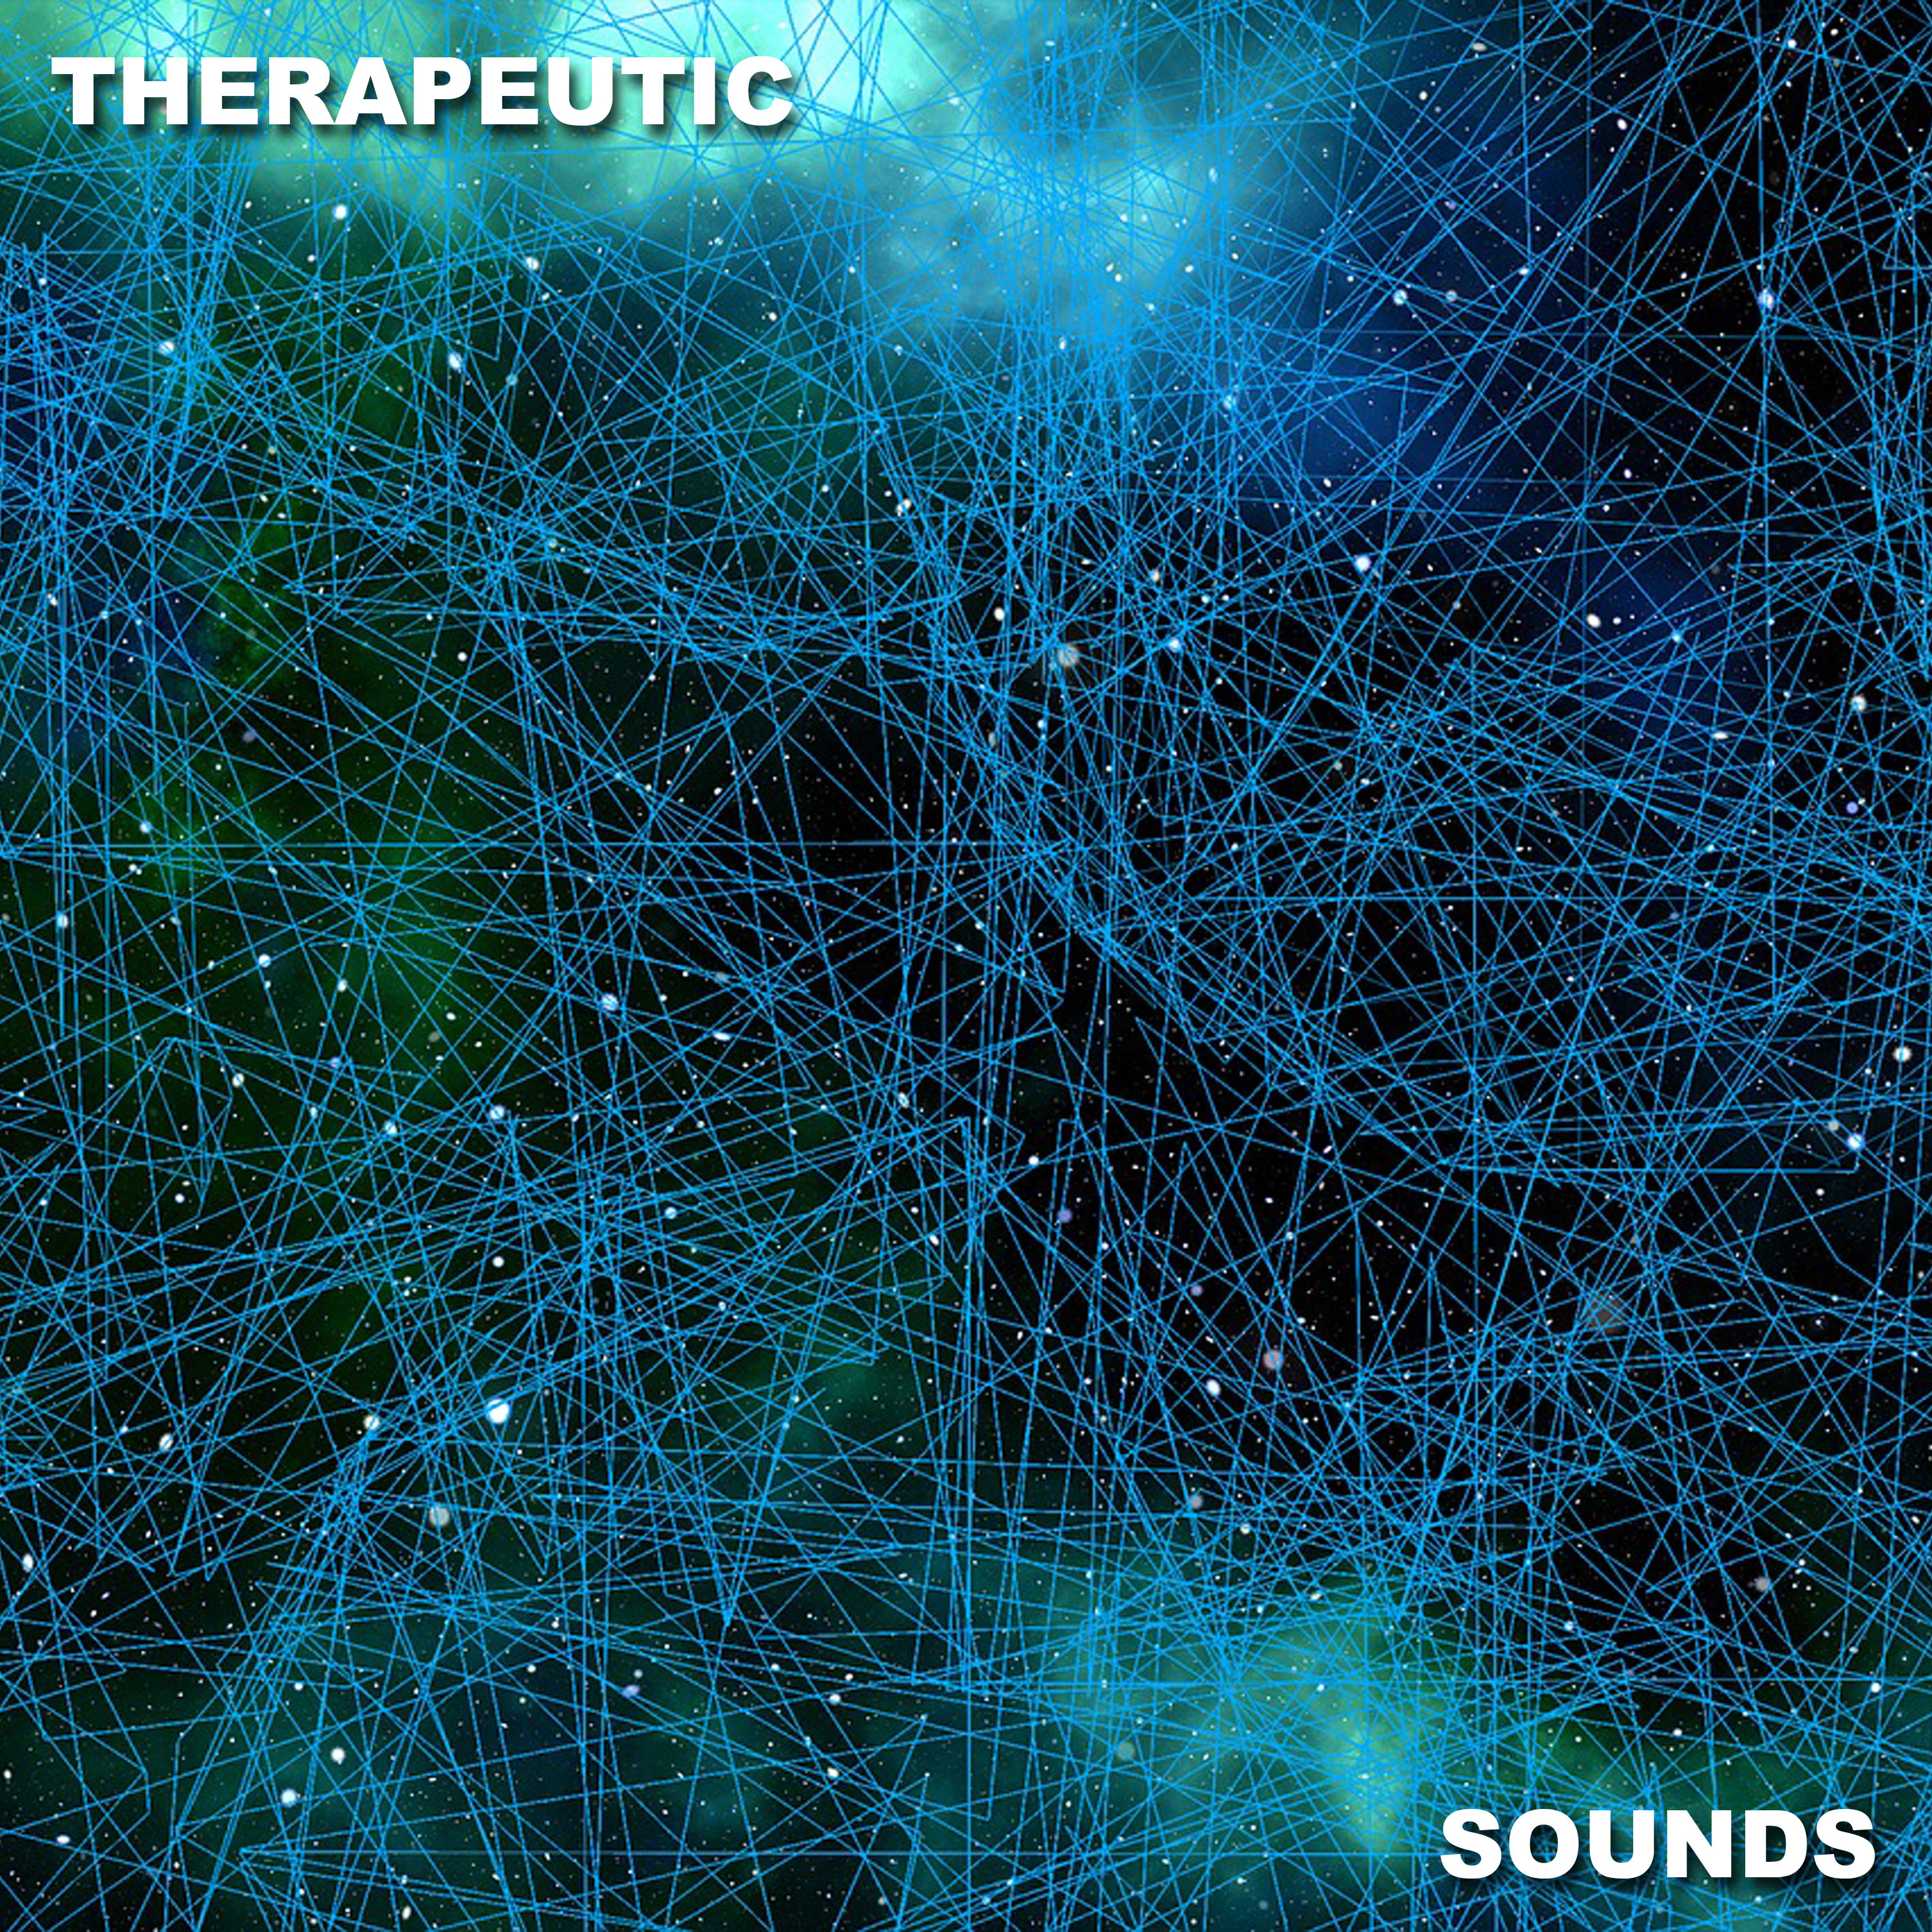 13 Therapeutic Sounds